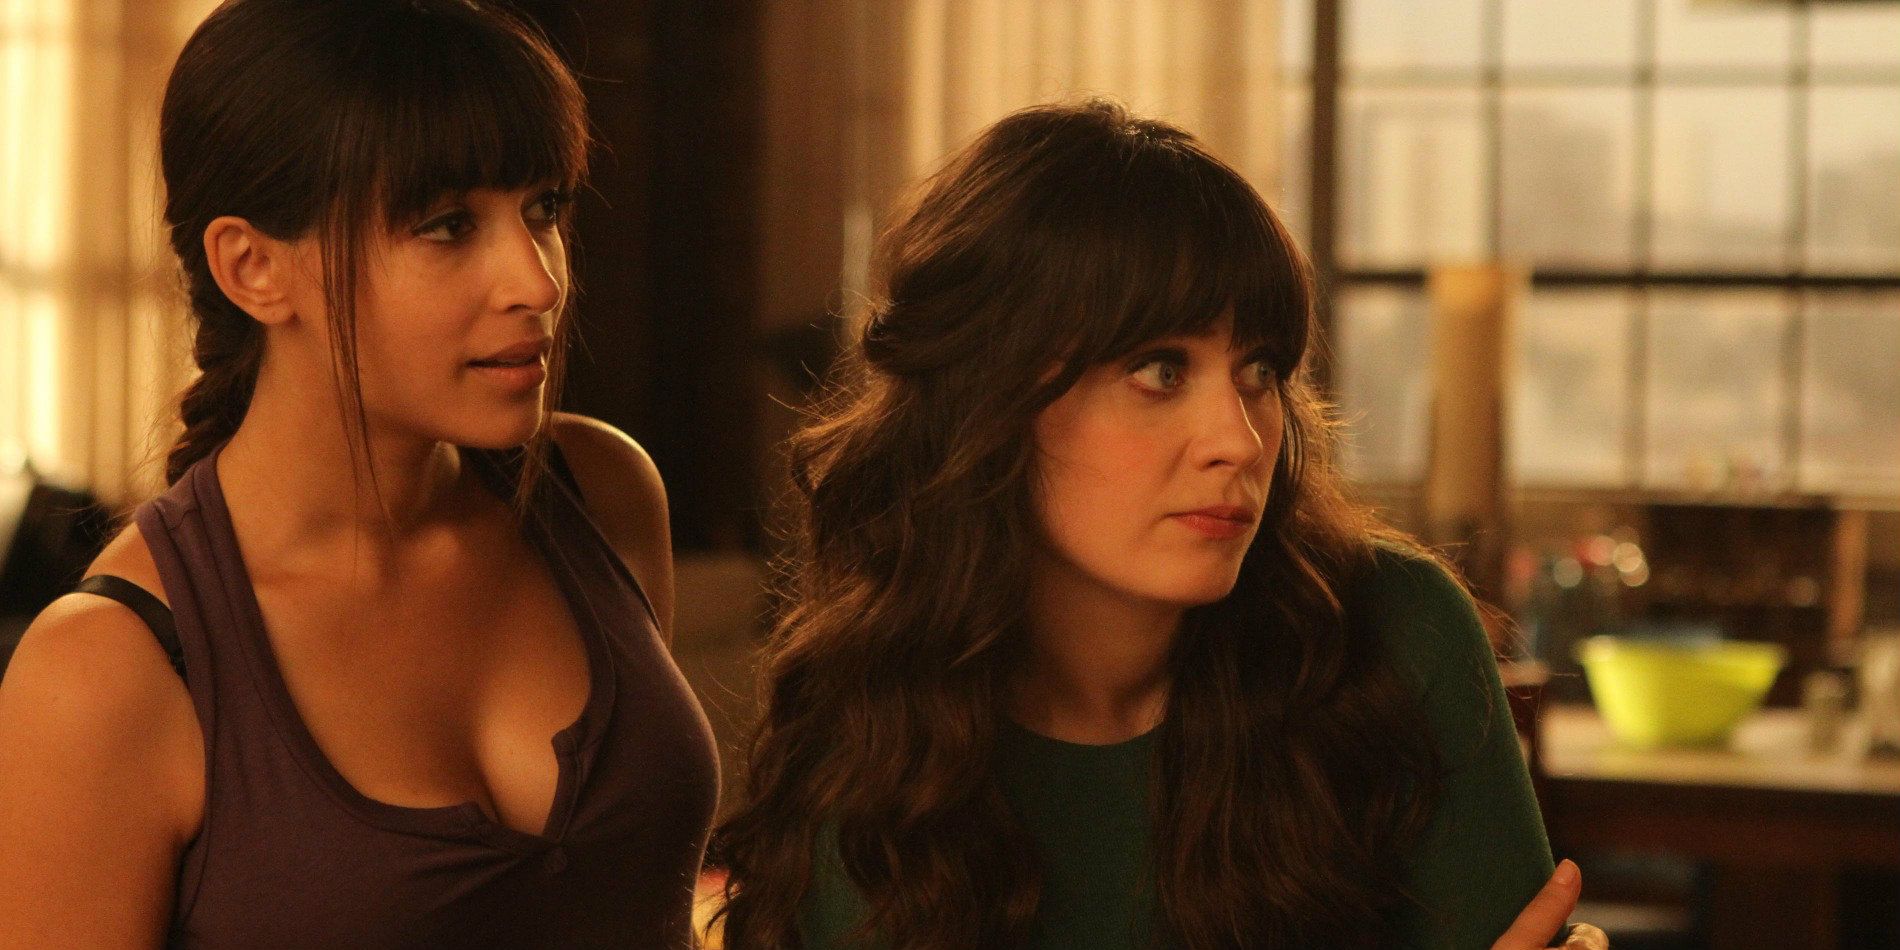 New Girl: The 10 Most-Watched Episodes